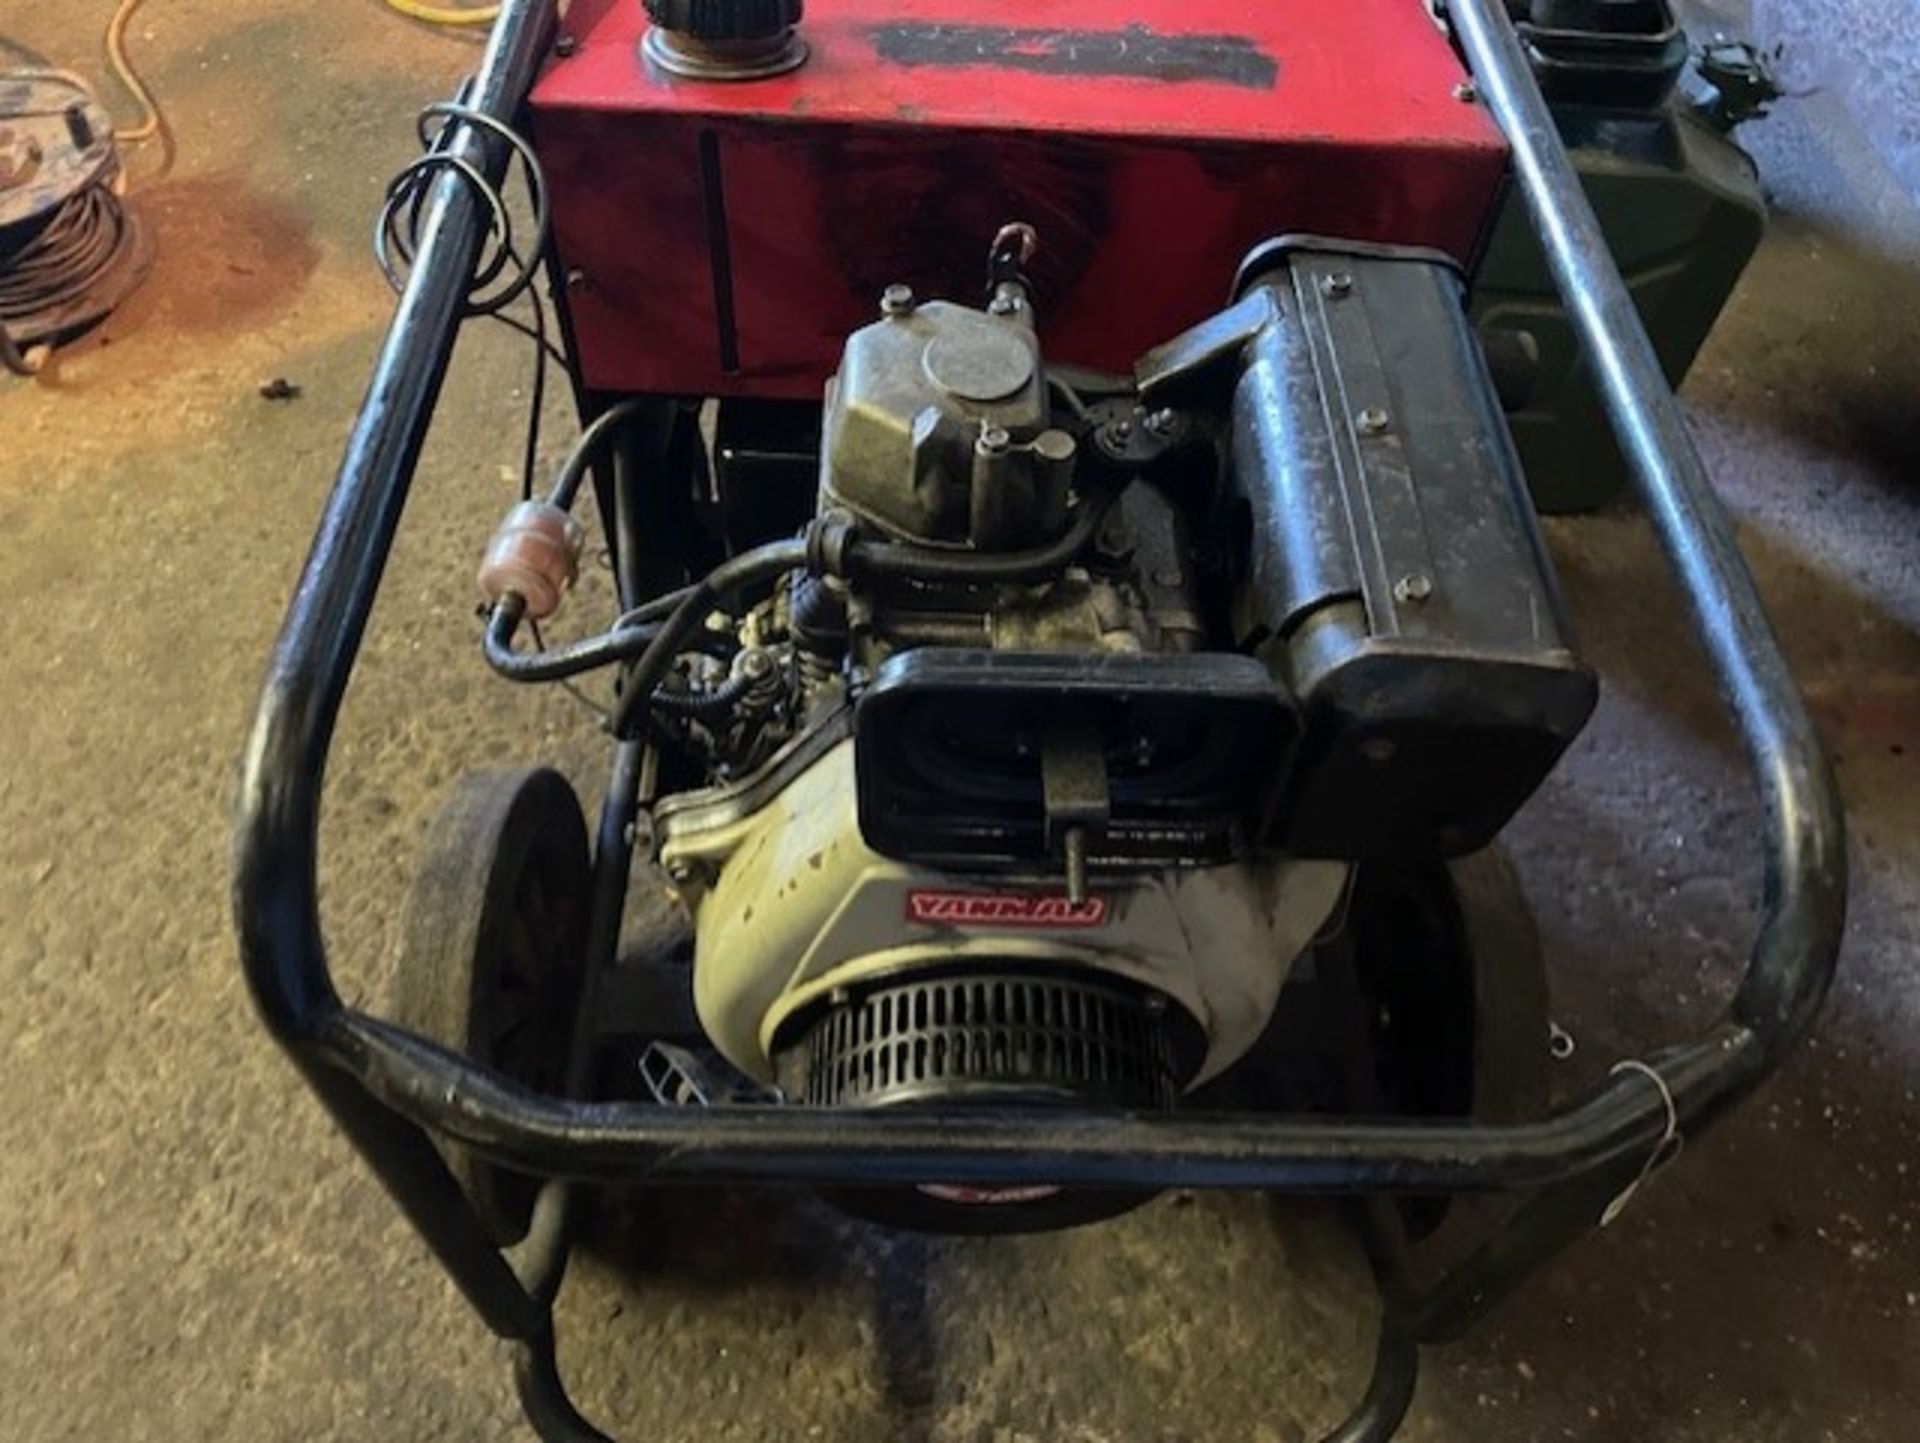 Generator with yanmar engine The engine sounds rough when you turn it over So could be a new - Image 3 of 7